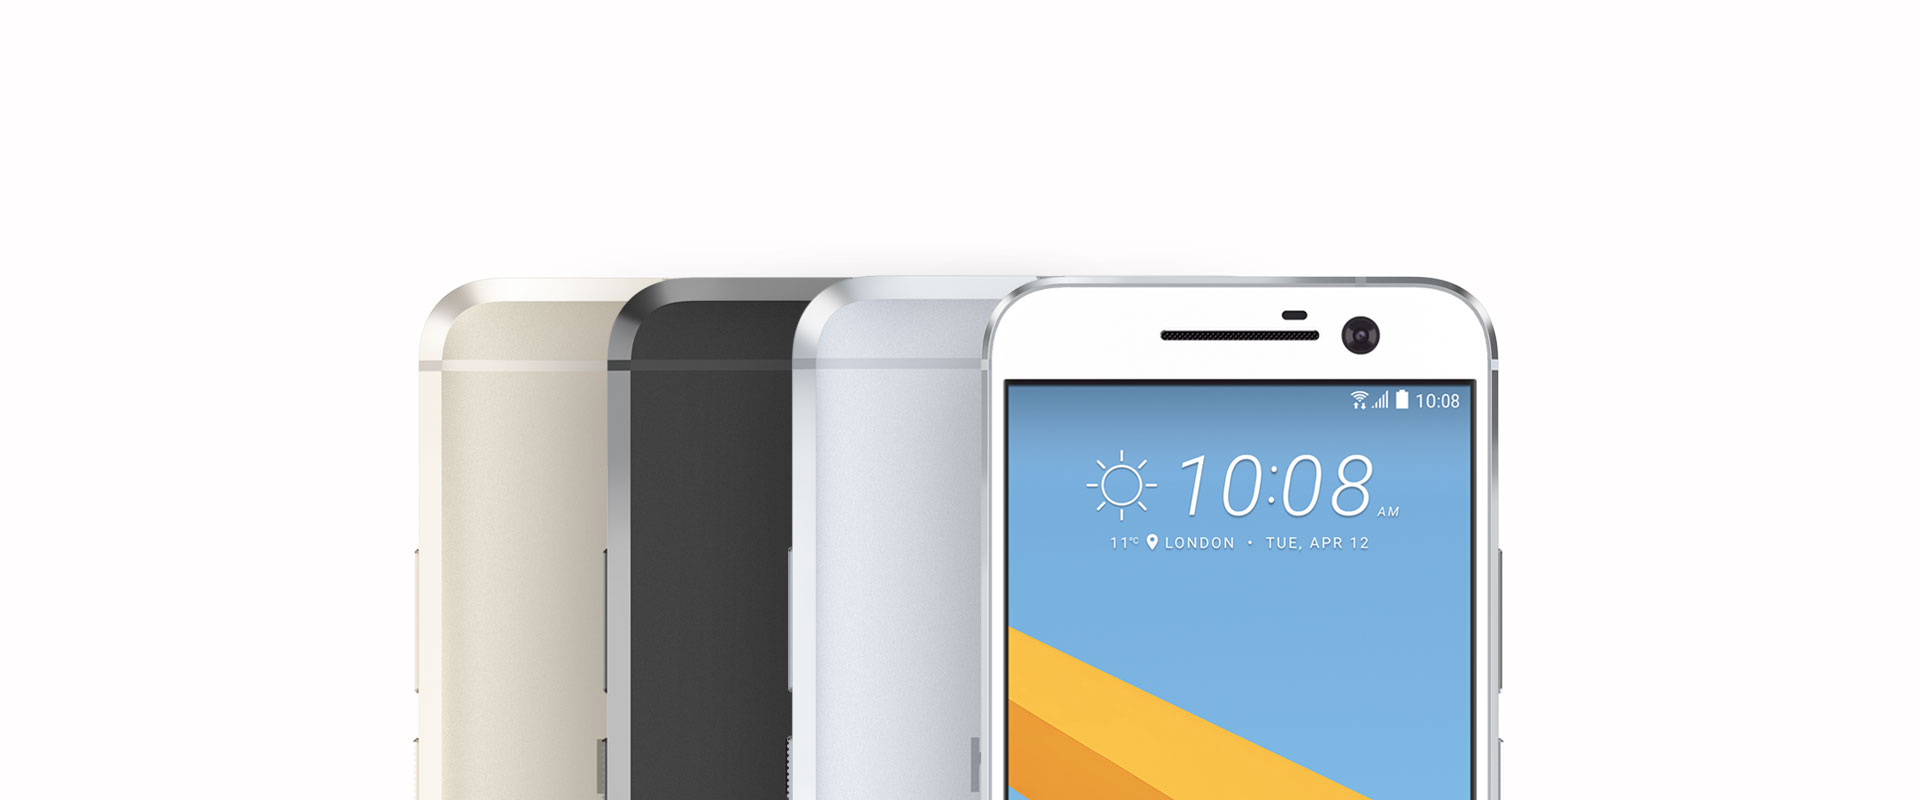 HTC Launched New Flagship SmartPhone HTC 10 HTC 10 India